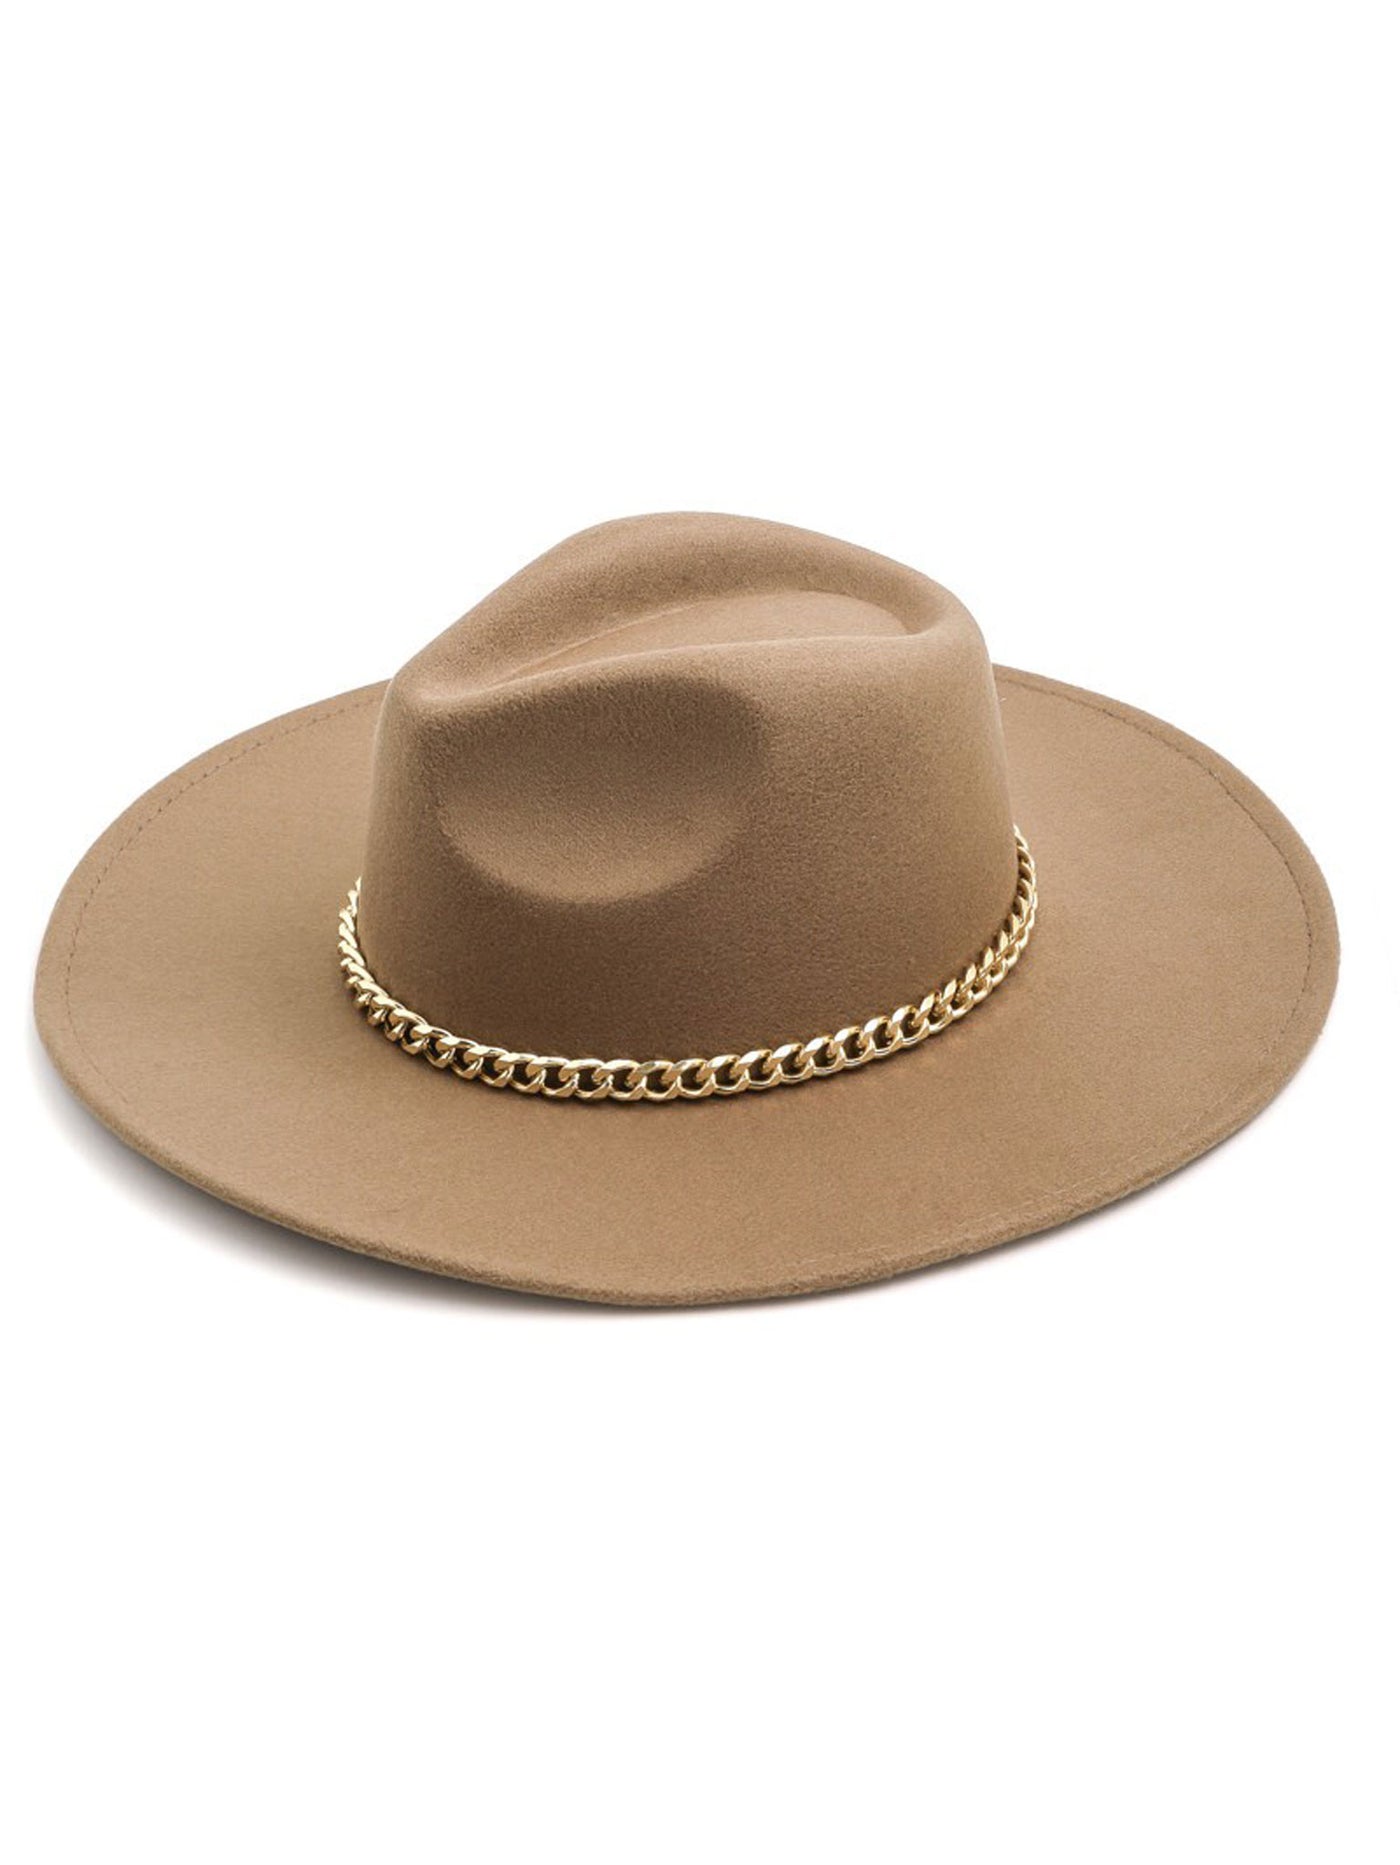 Make It Fashion Brown Small Chainlink Hat